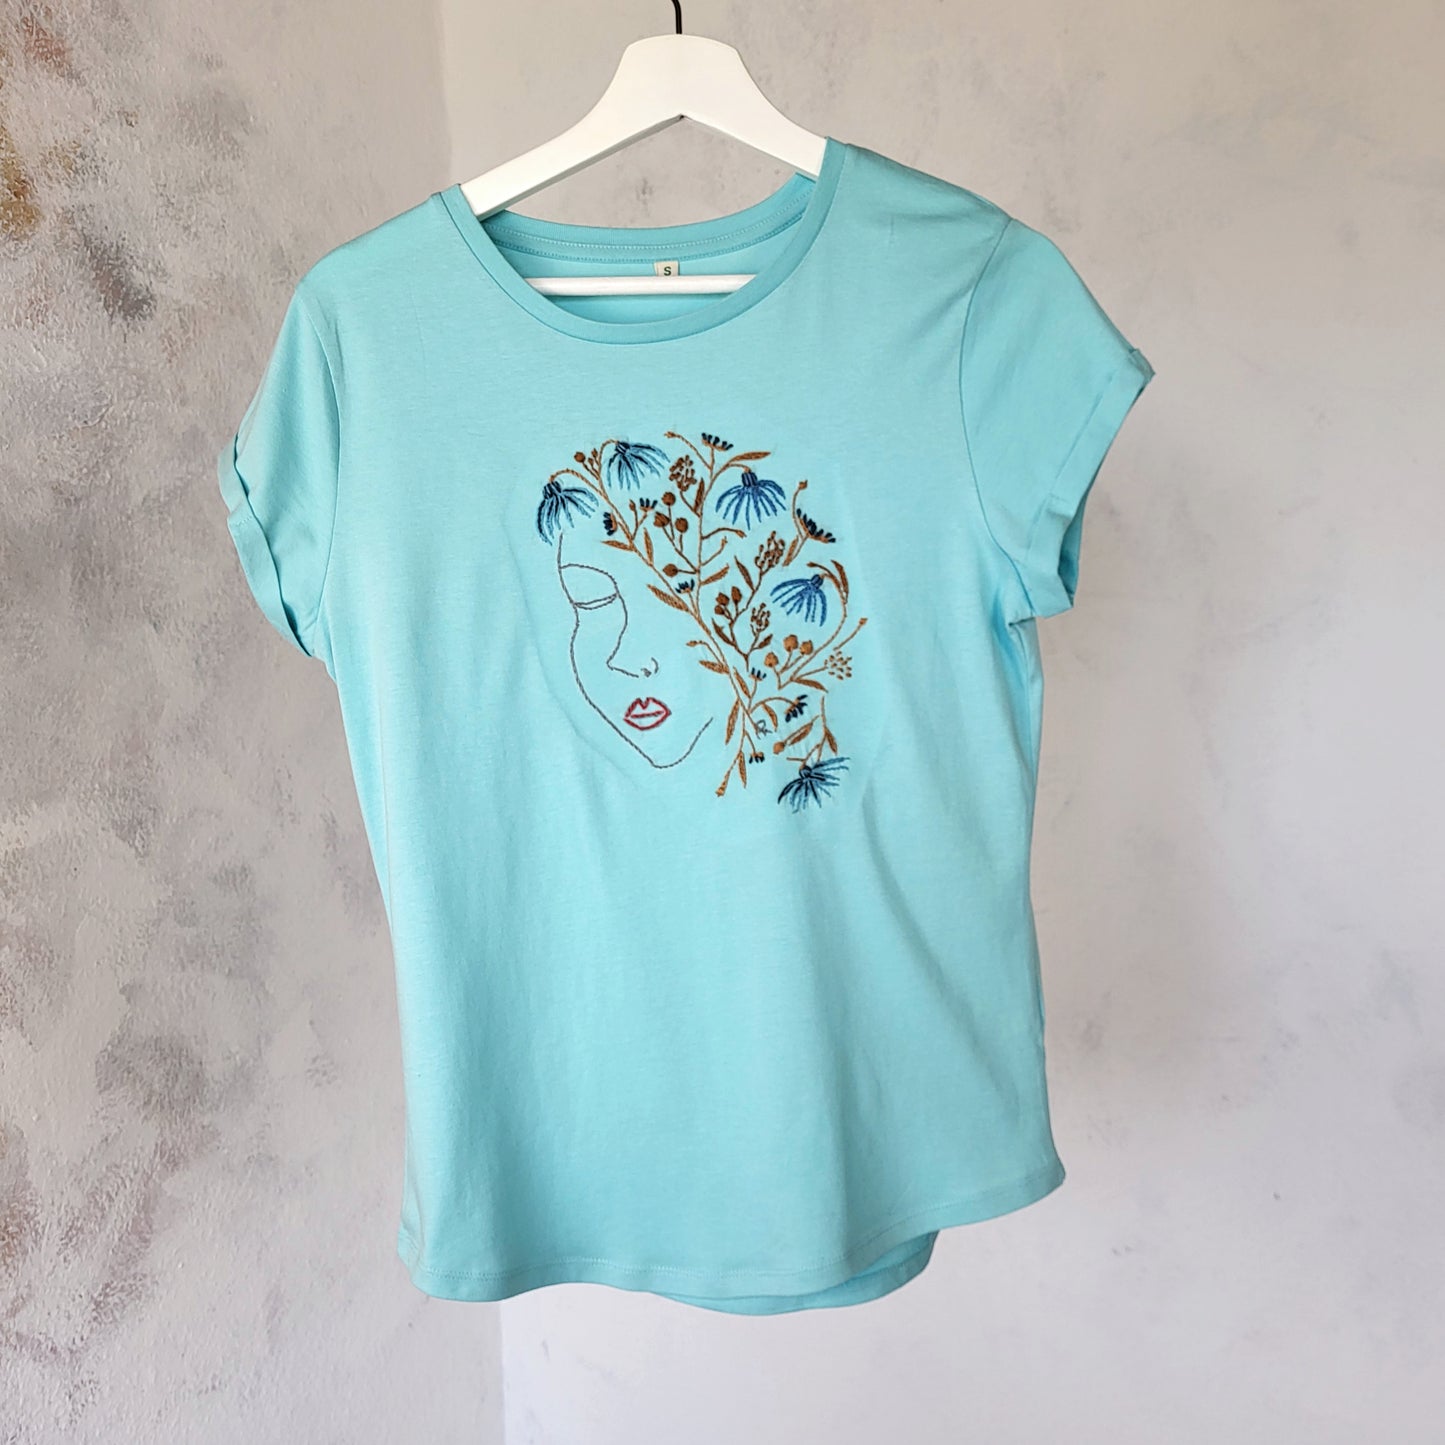 Anne-Marie Roth - Serie: Naturwesen - turquoise T-Shirt S - Unique Artwear